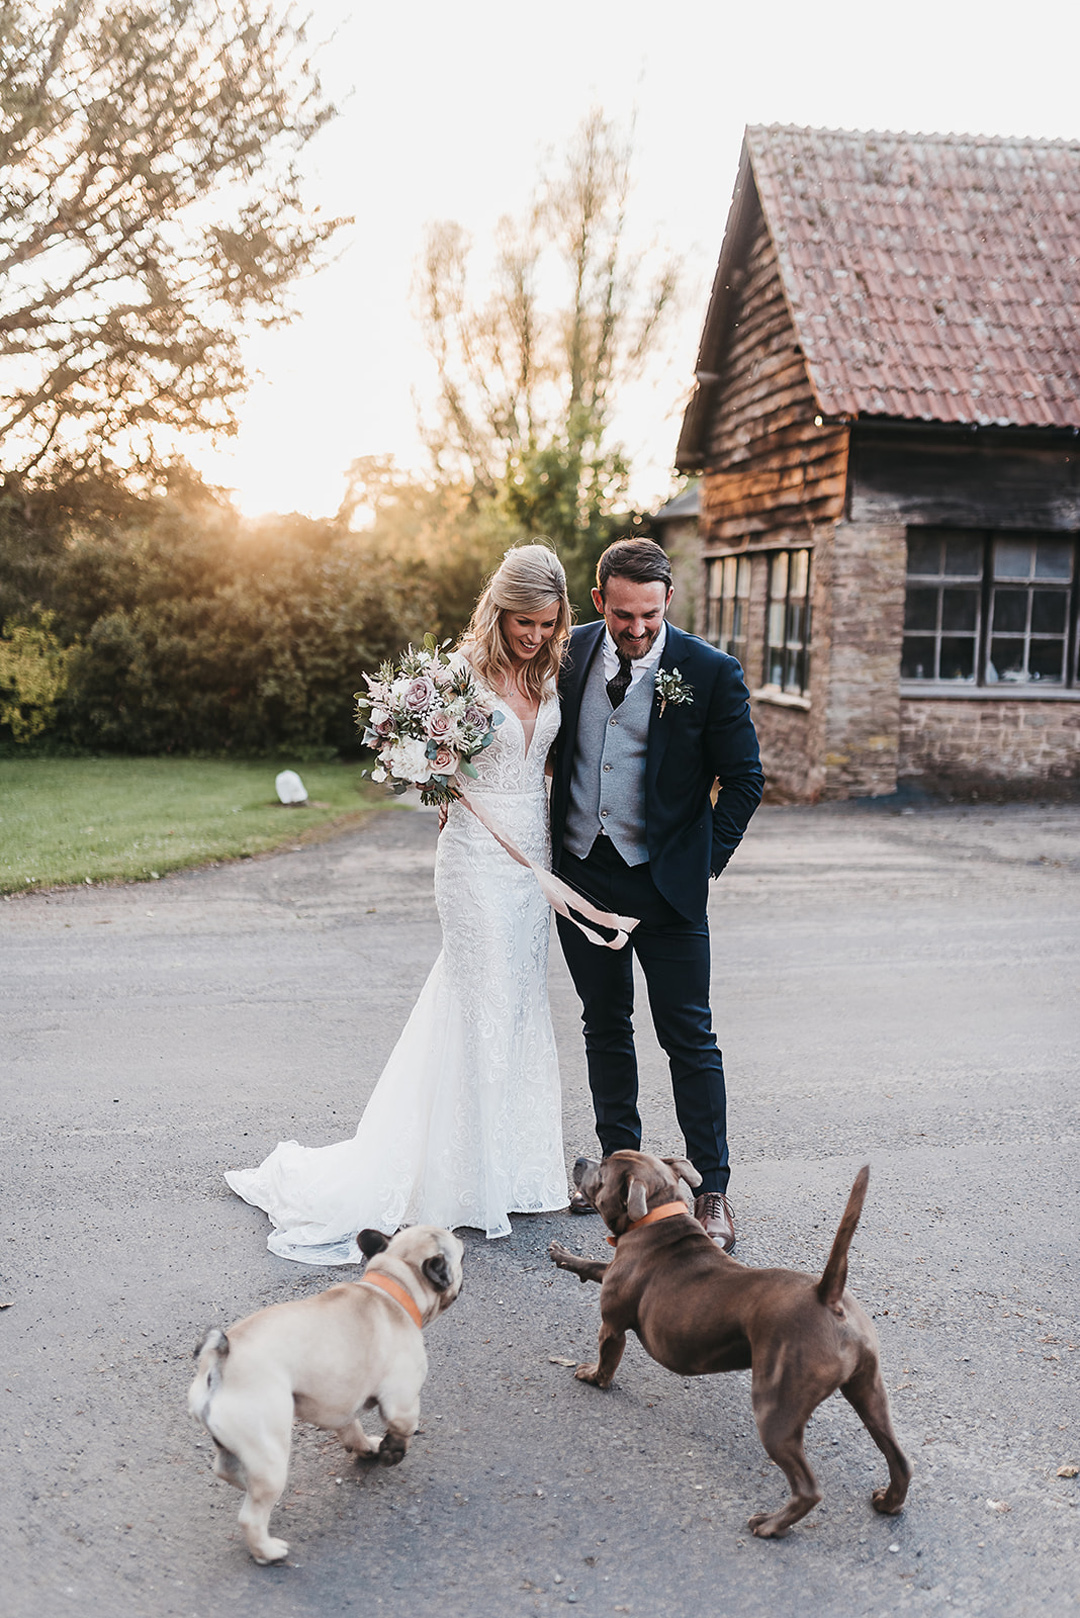 Bride & groom with dogs, Broadfield country house wedding venue, Herefordshire, West Midlands